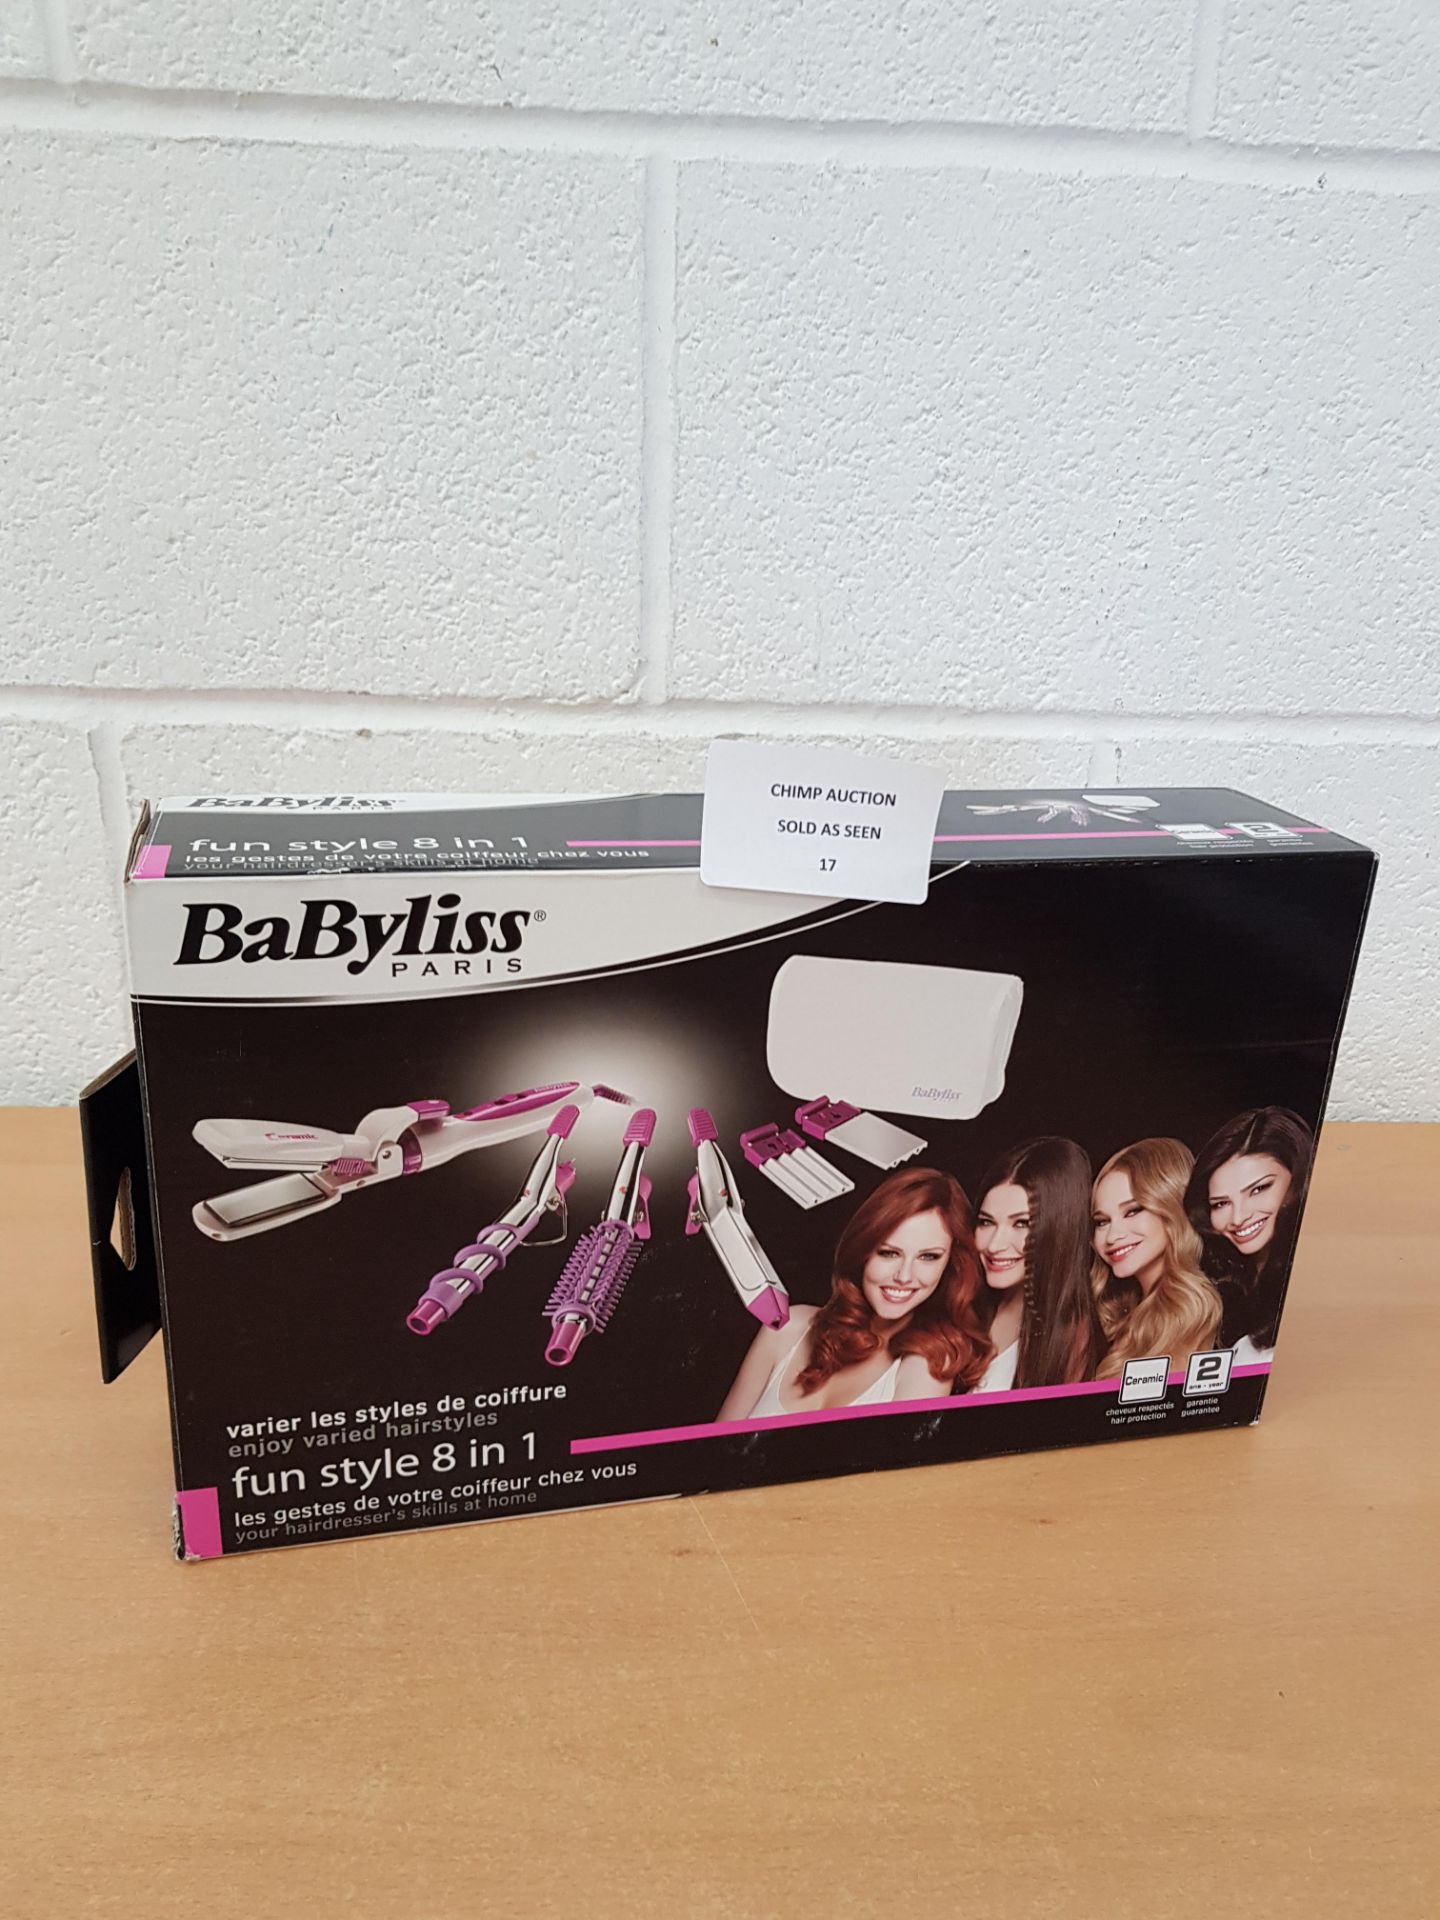 Babyliss Fun Style Multistyler 8 in 1 Portable Bag 2020CE RRP £69.99.